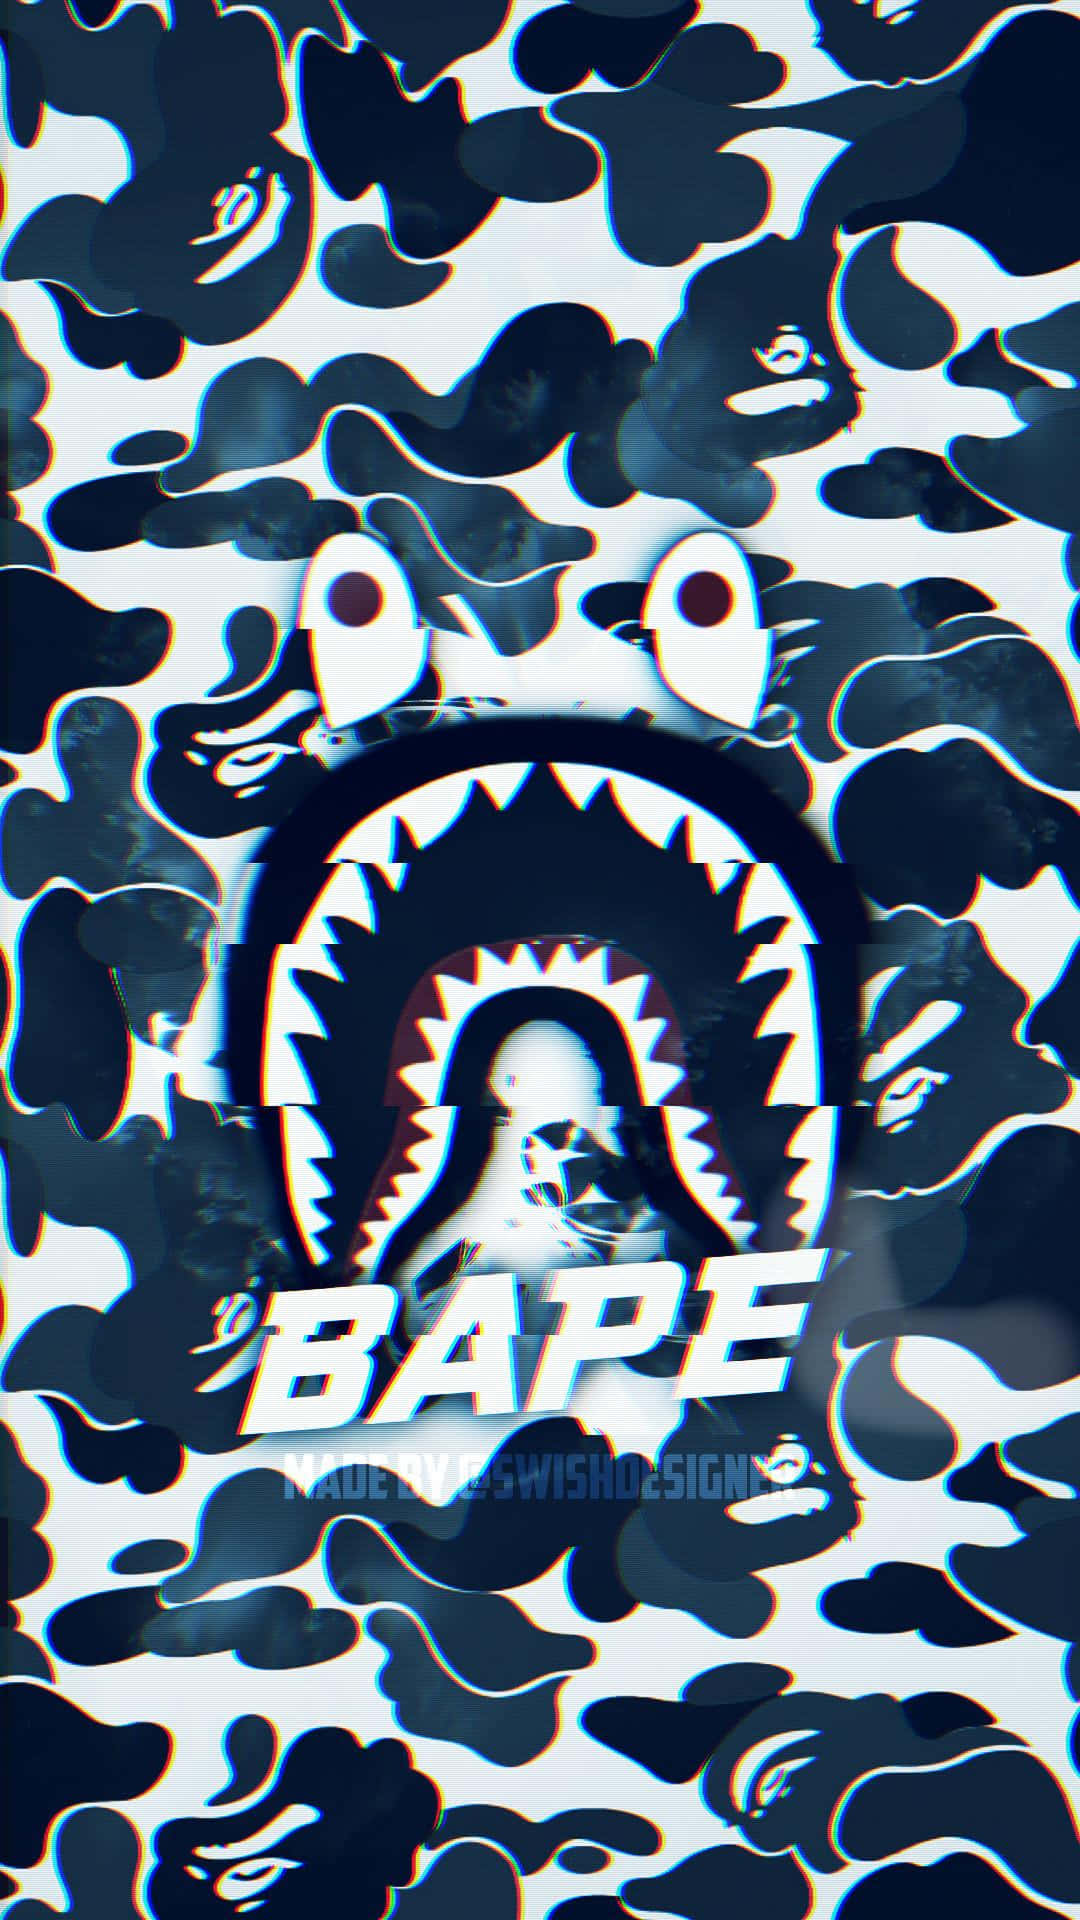 Upgrade your mobile style with the latest BAPE iPhone 6 Wallpaper